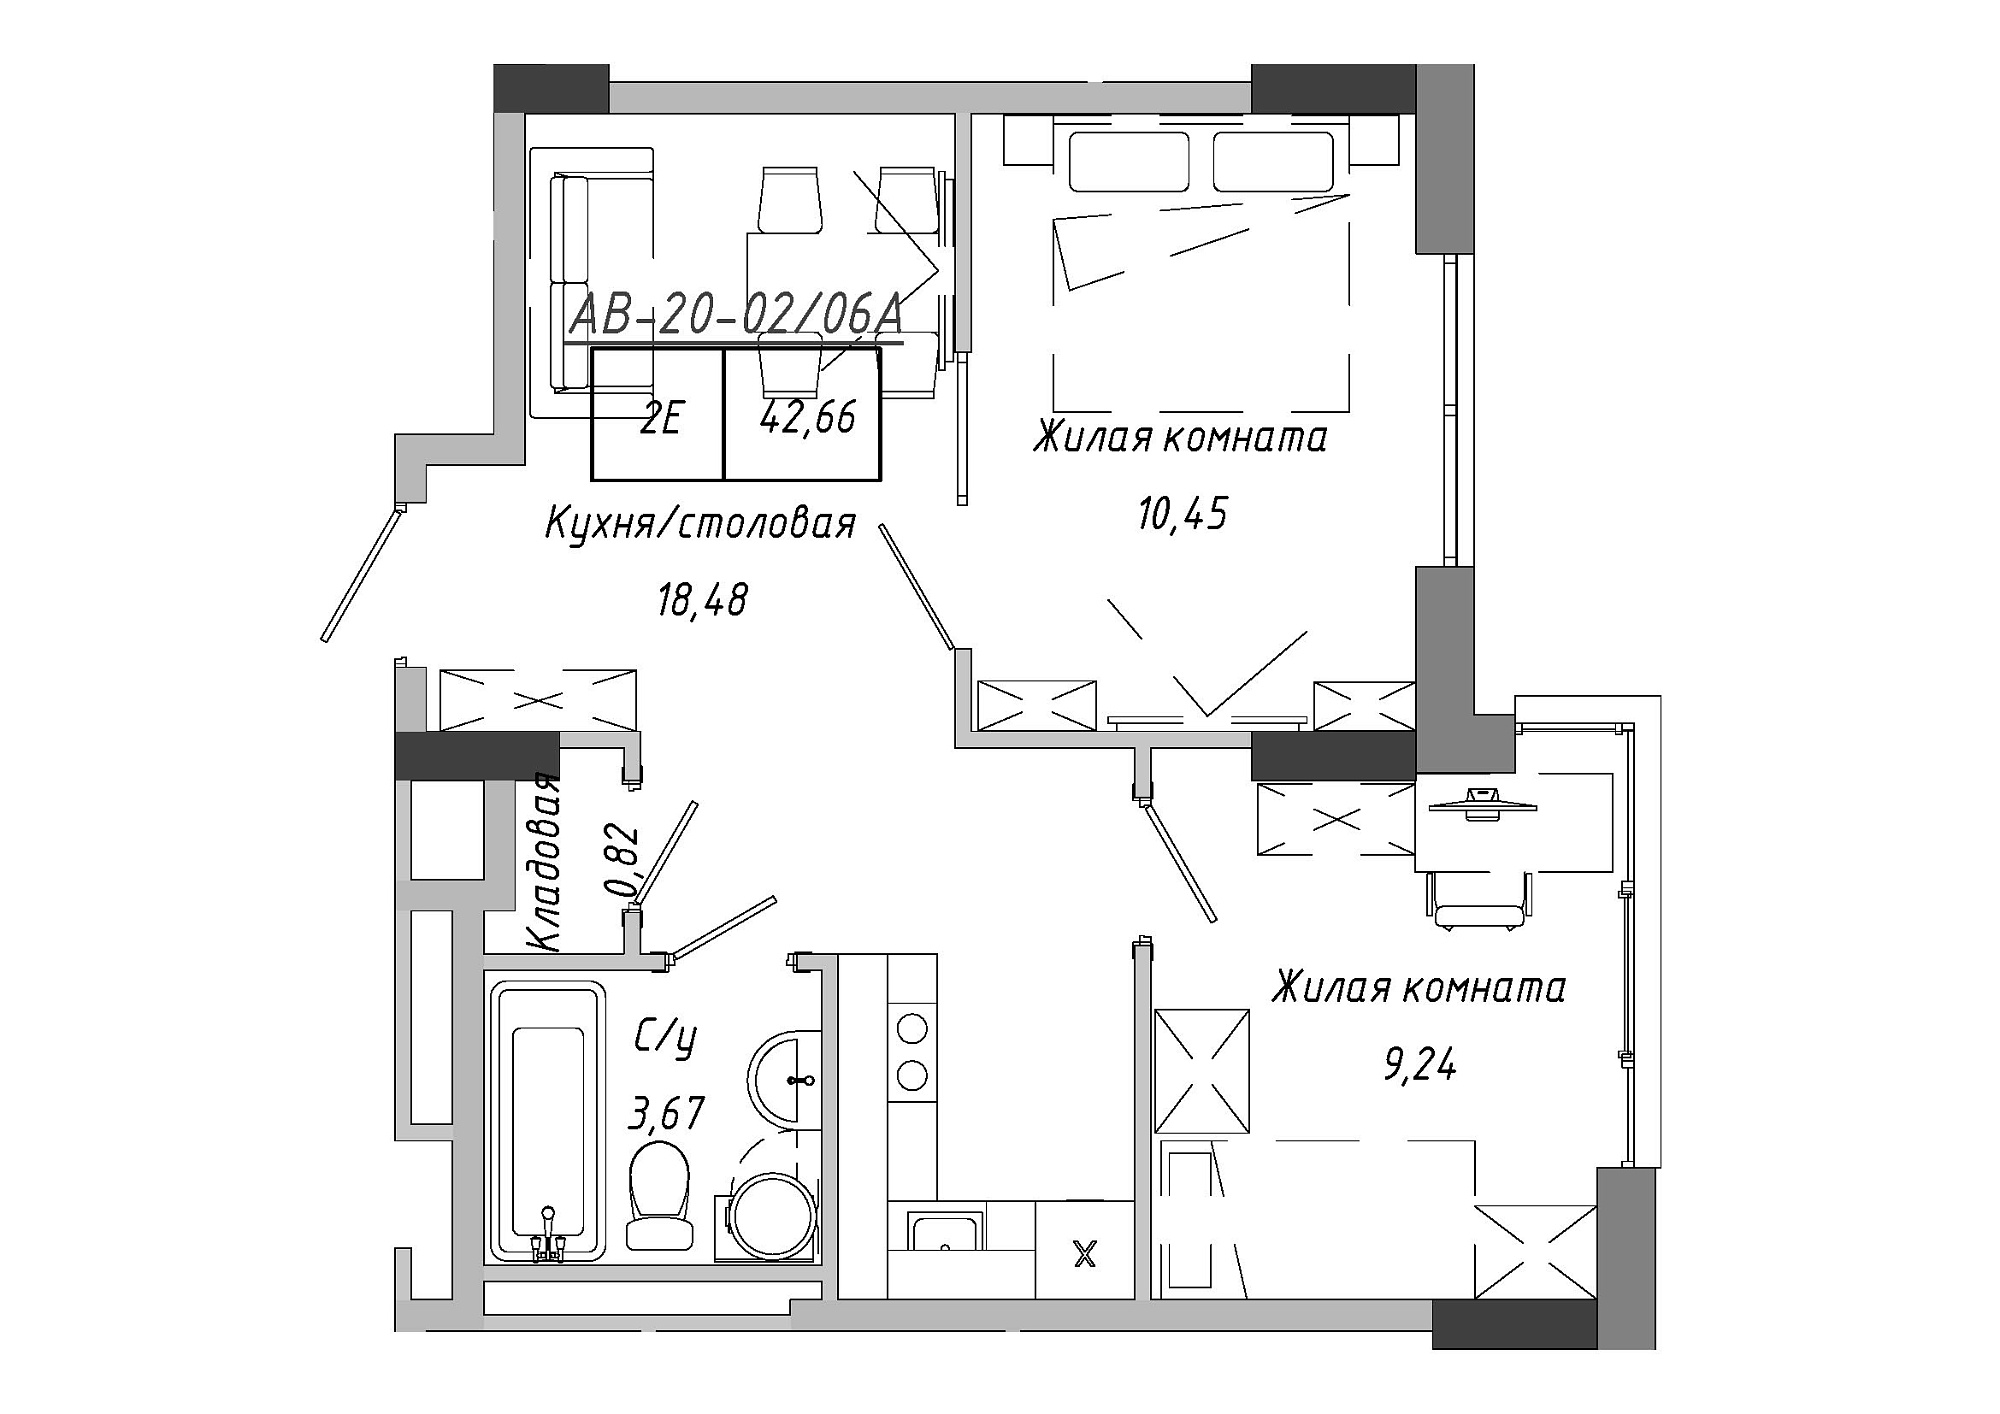 Planning 2-rm flats area 42.66m2, AB-20-02/0006а.